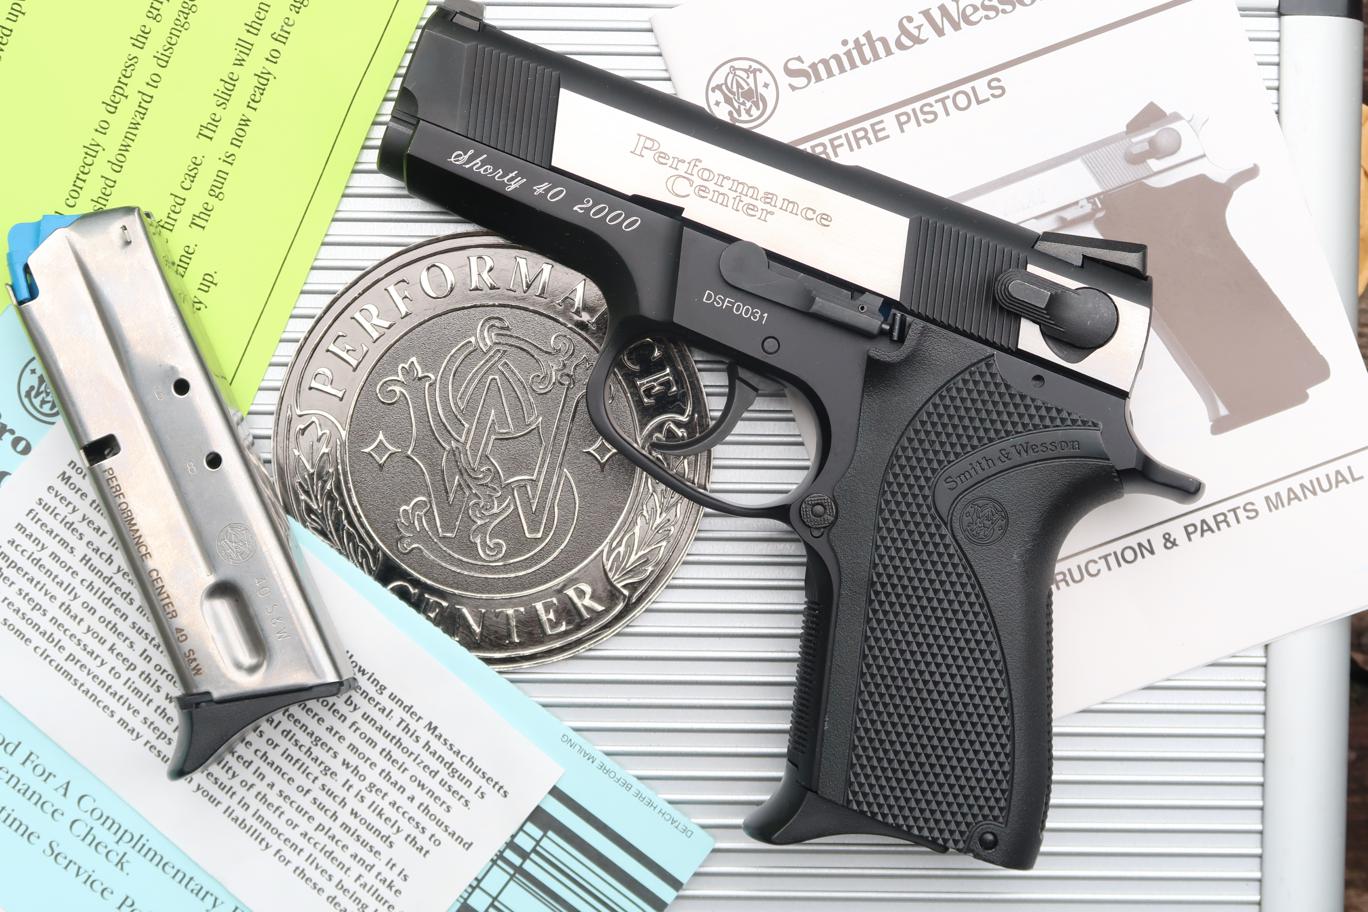 S&W, 2000 Shorty 40, DSF0031, A-1660 - Historic Investments